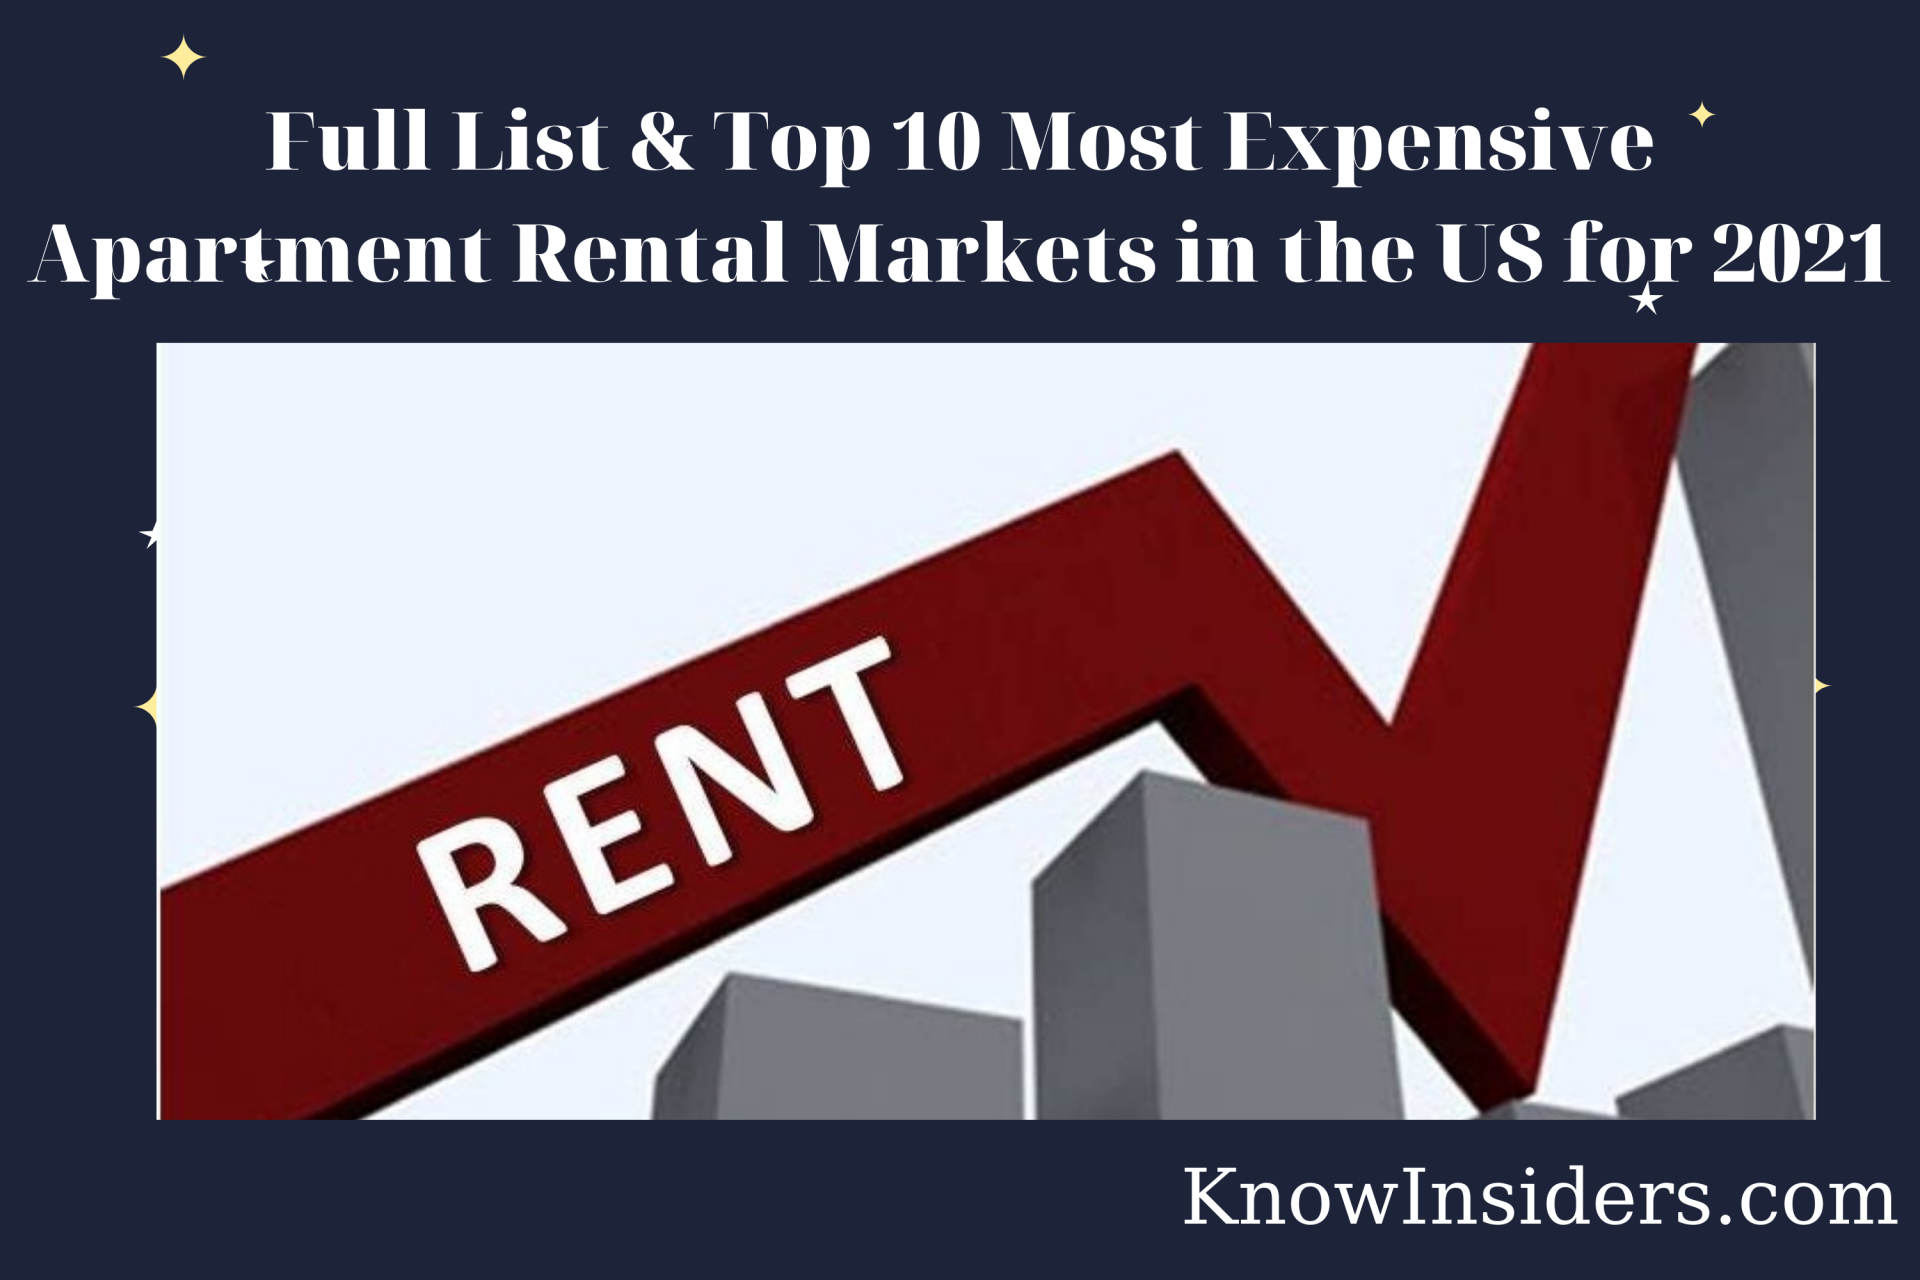 Apartment Rental Markets in America: Top 10 Most Expensive Cities and Full List